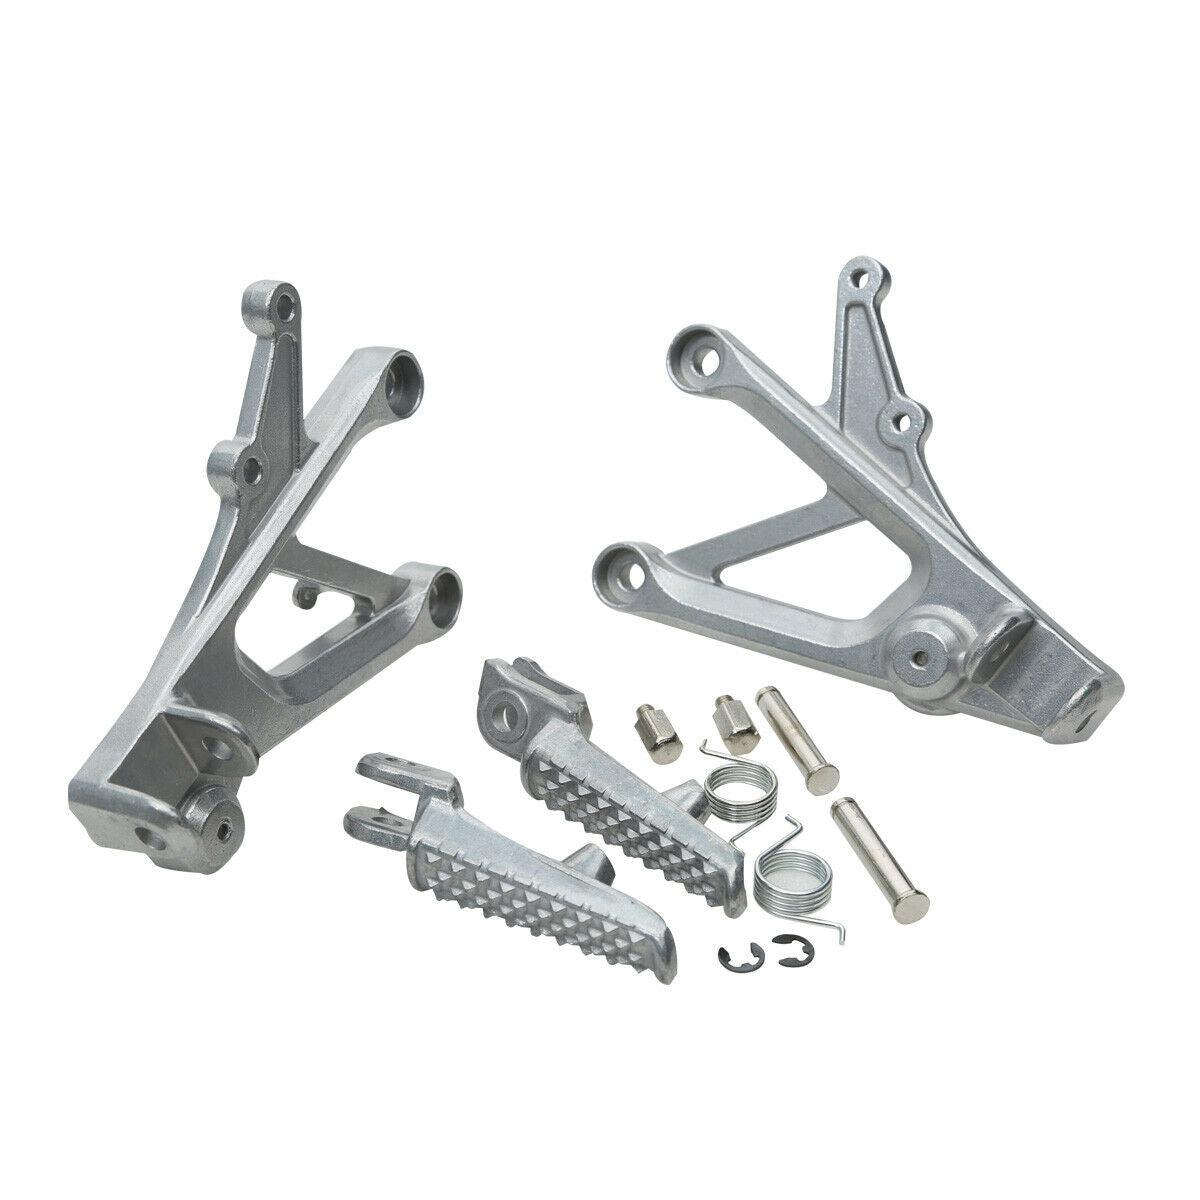 Front Footrest Foot Pegs Bracket Fit For Honda CBR600 F4I 01-06 CBR600F4 99-00 - Moto Life Products